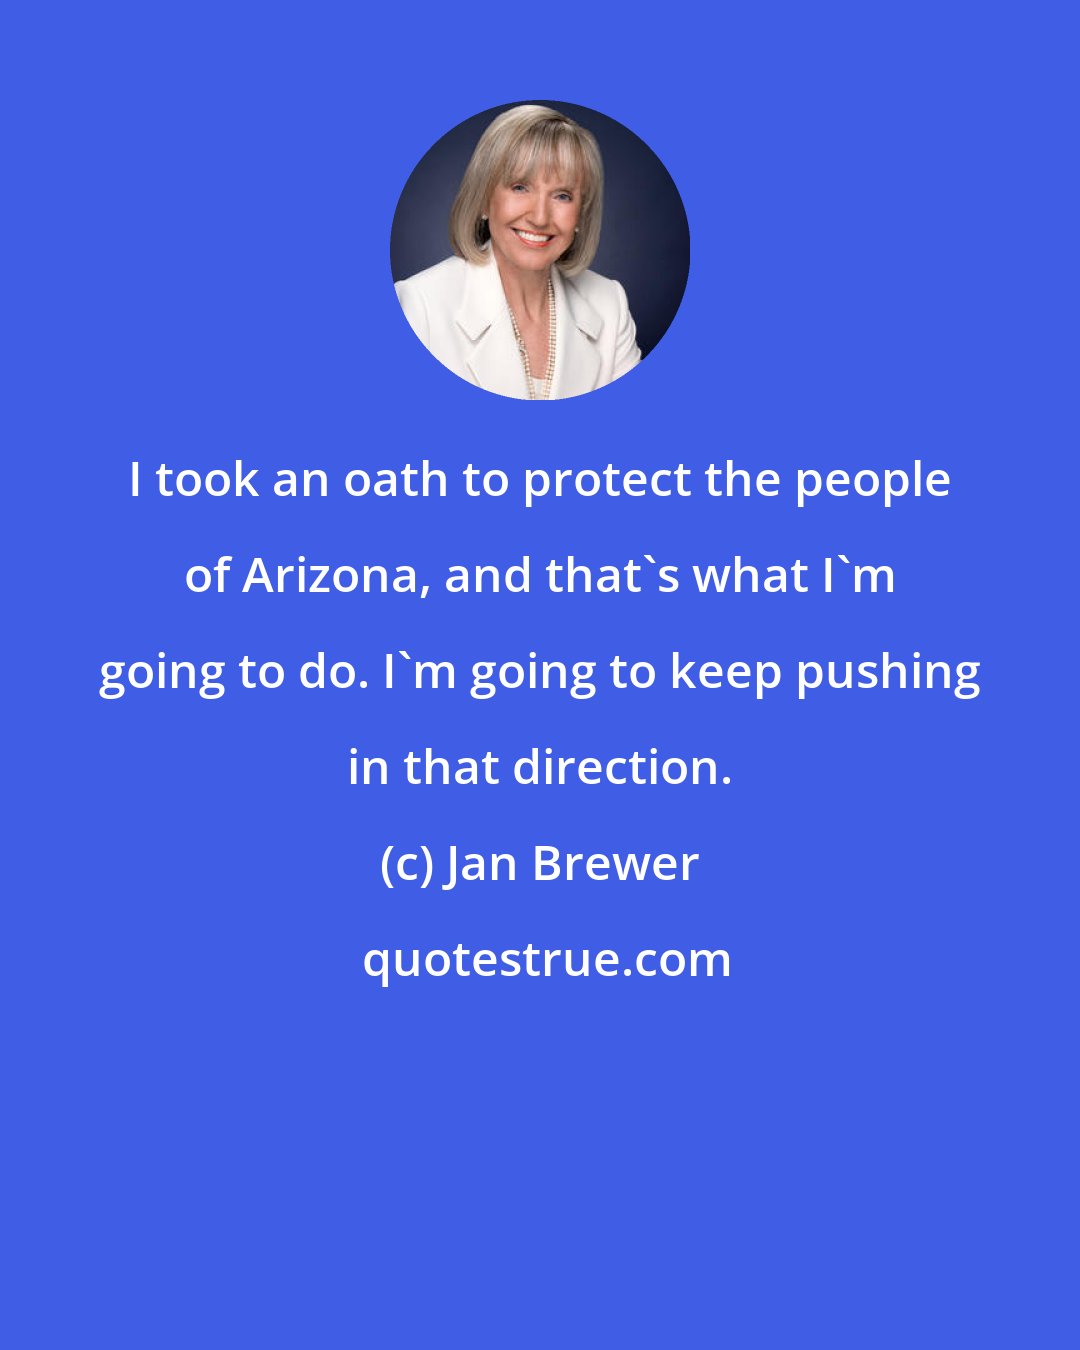 Jan Brewer: I took an oath to protect the people of Arizona, and that's what I'm going to do. I'm going to keep pushing in that direction.